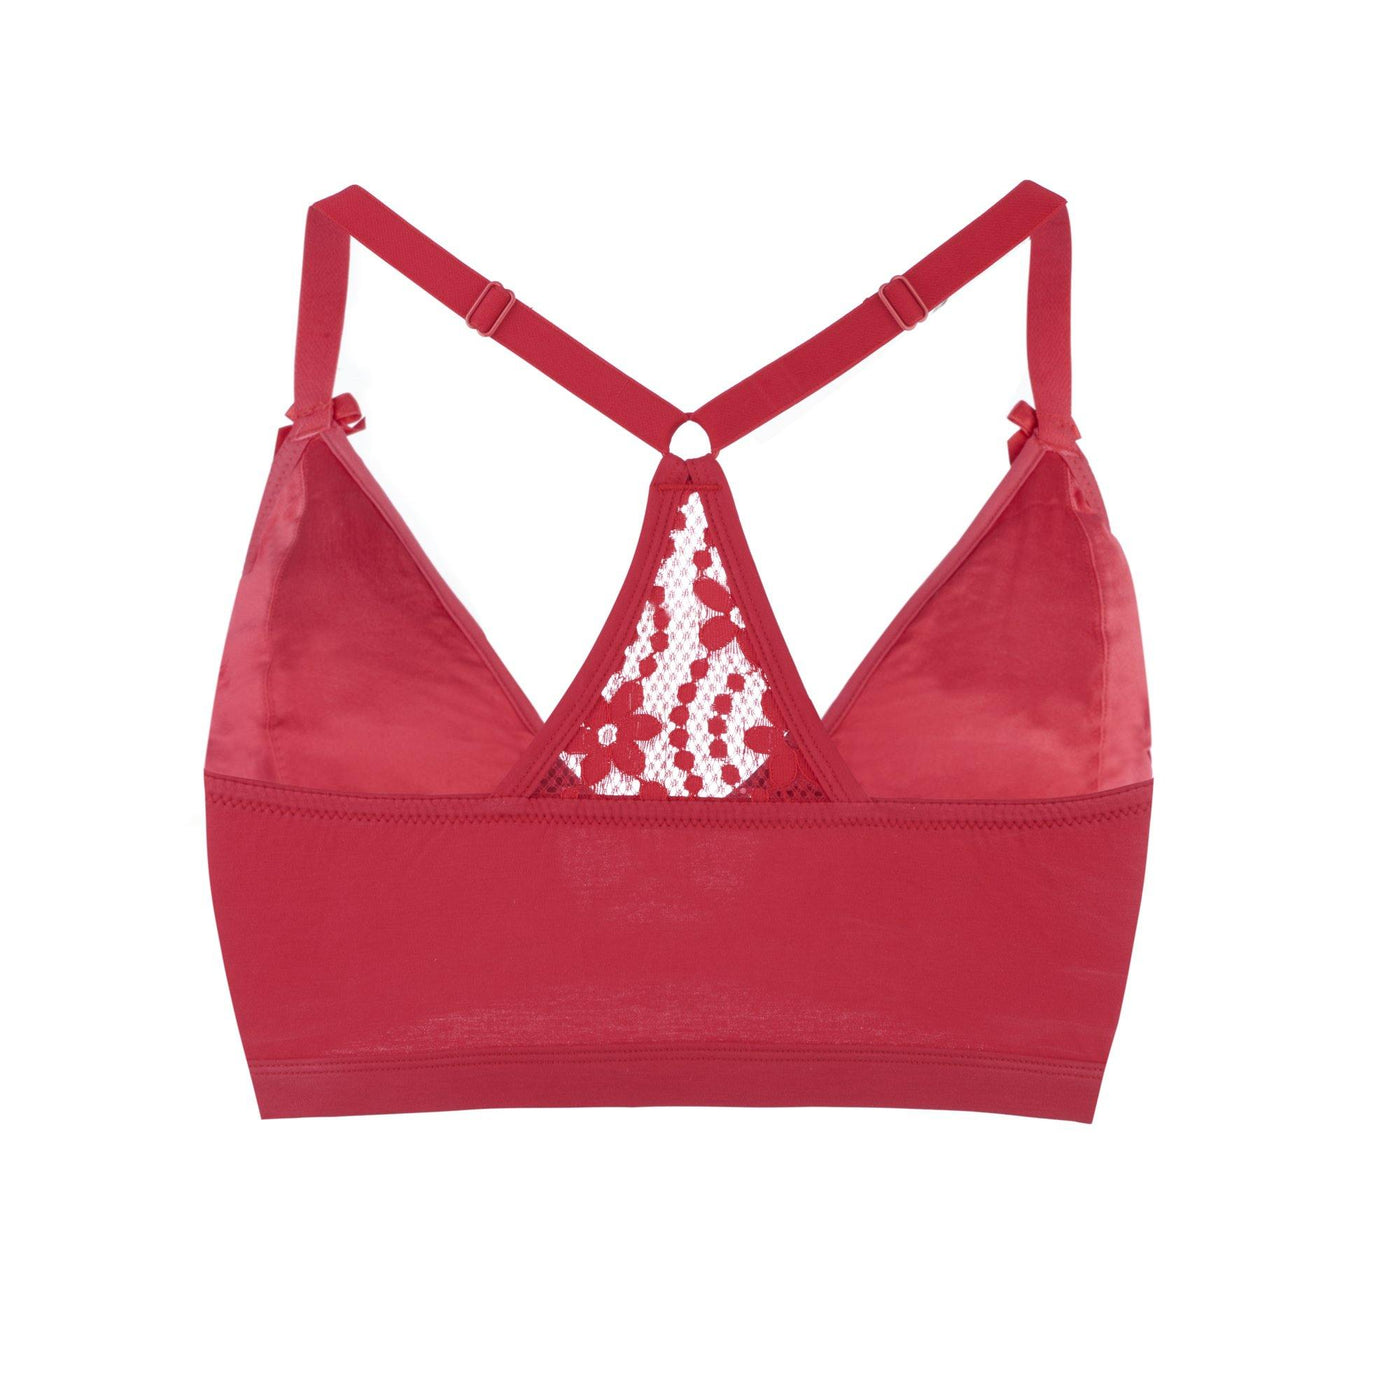 Passion Red - Lace Organic Cotton & Silk Bralette - Juliemay Lingerie